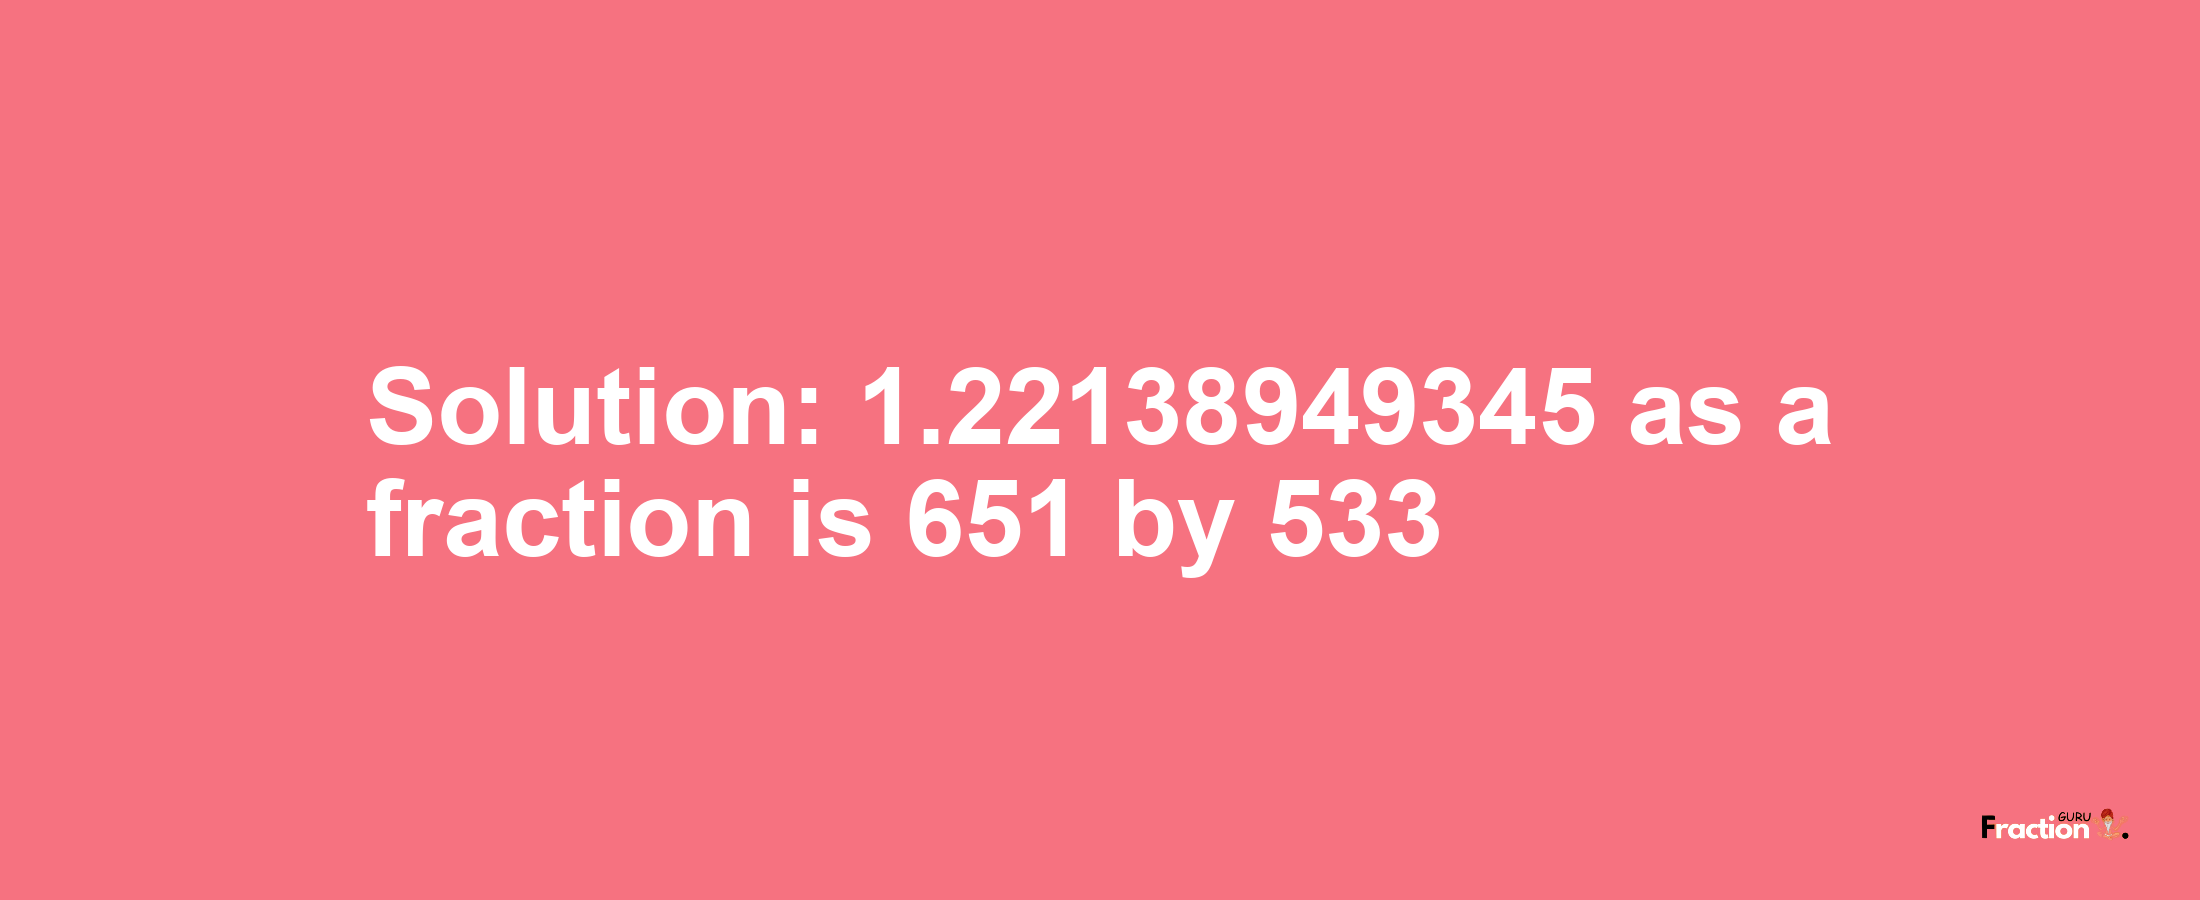 Solution:1.22138949345 as a fraction is 651/533